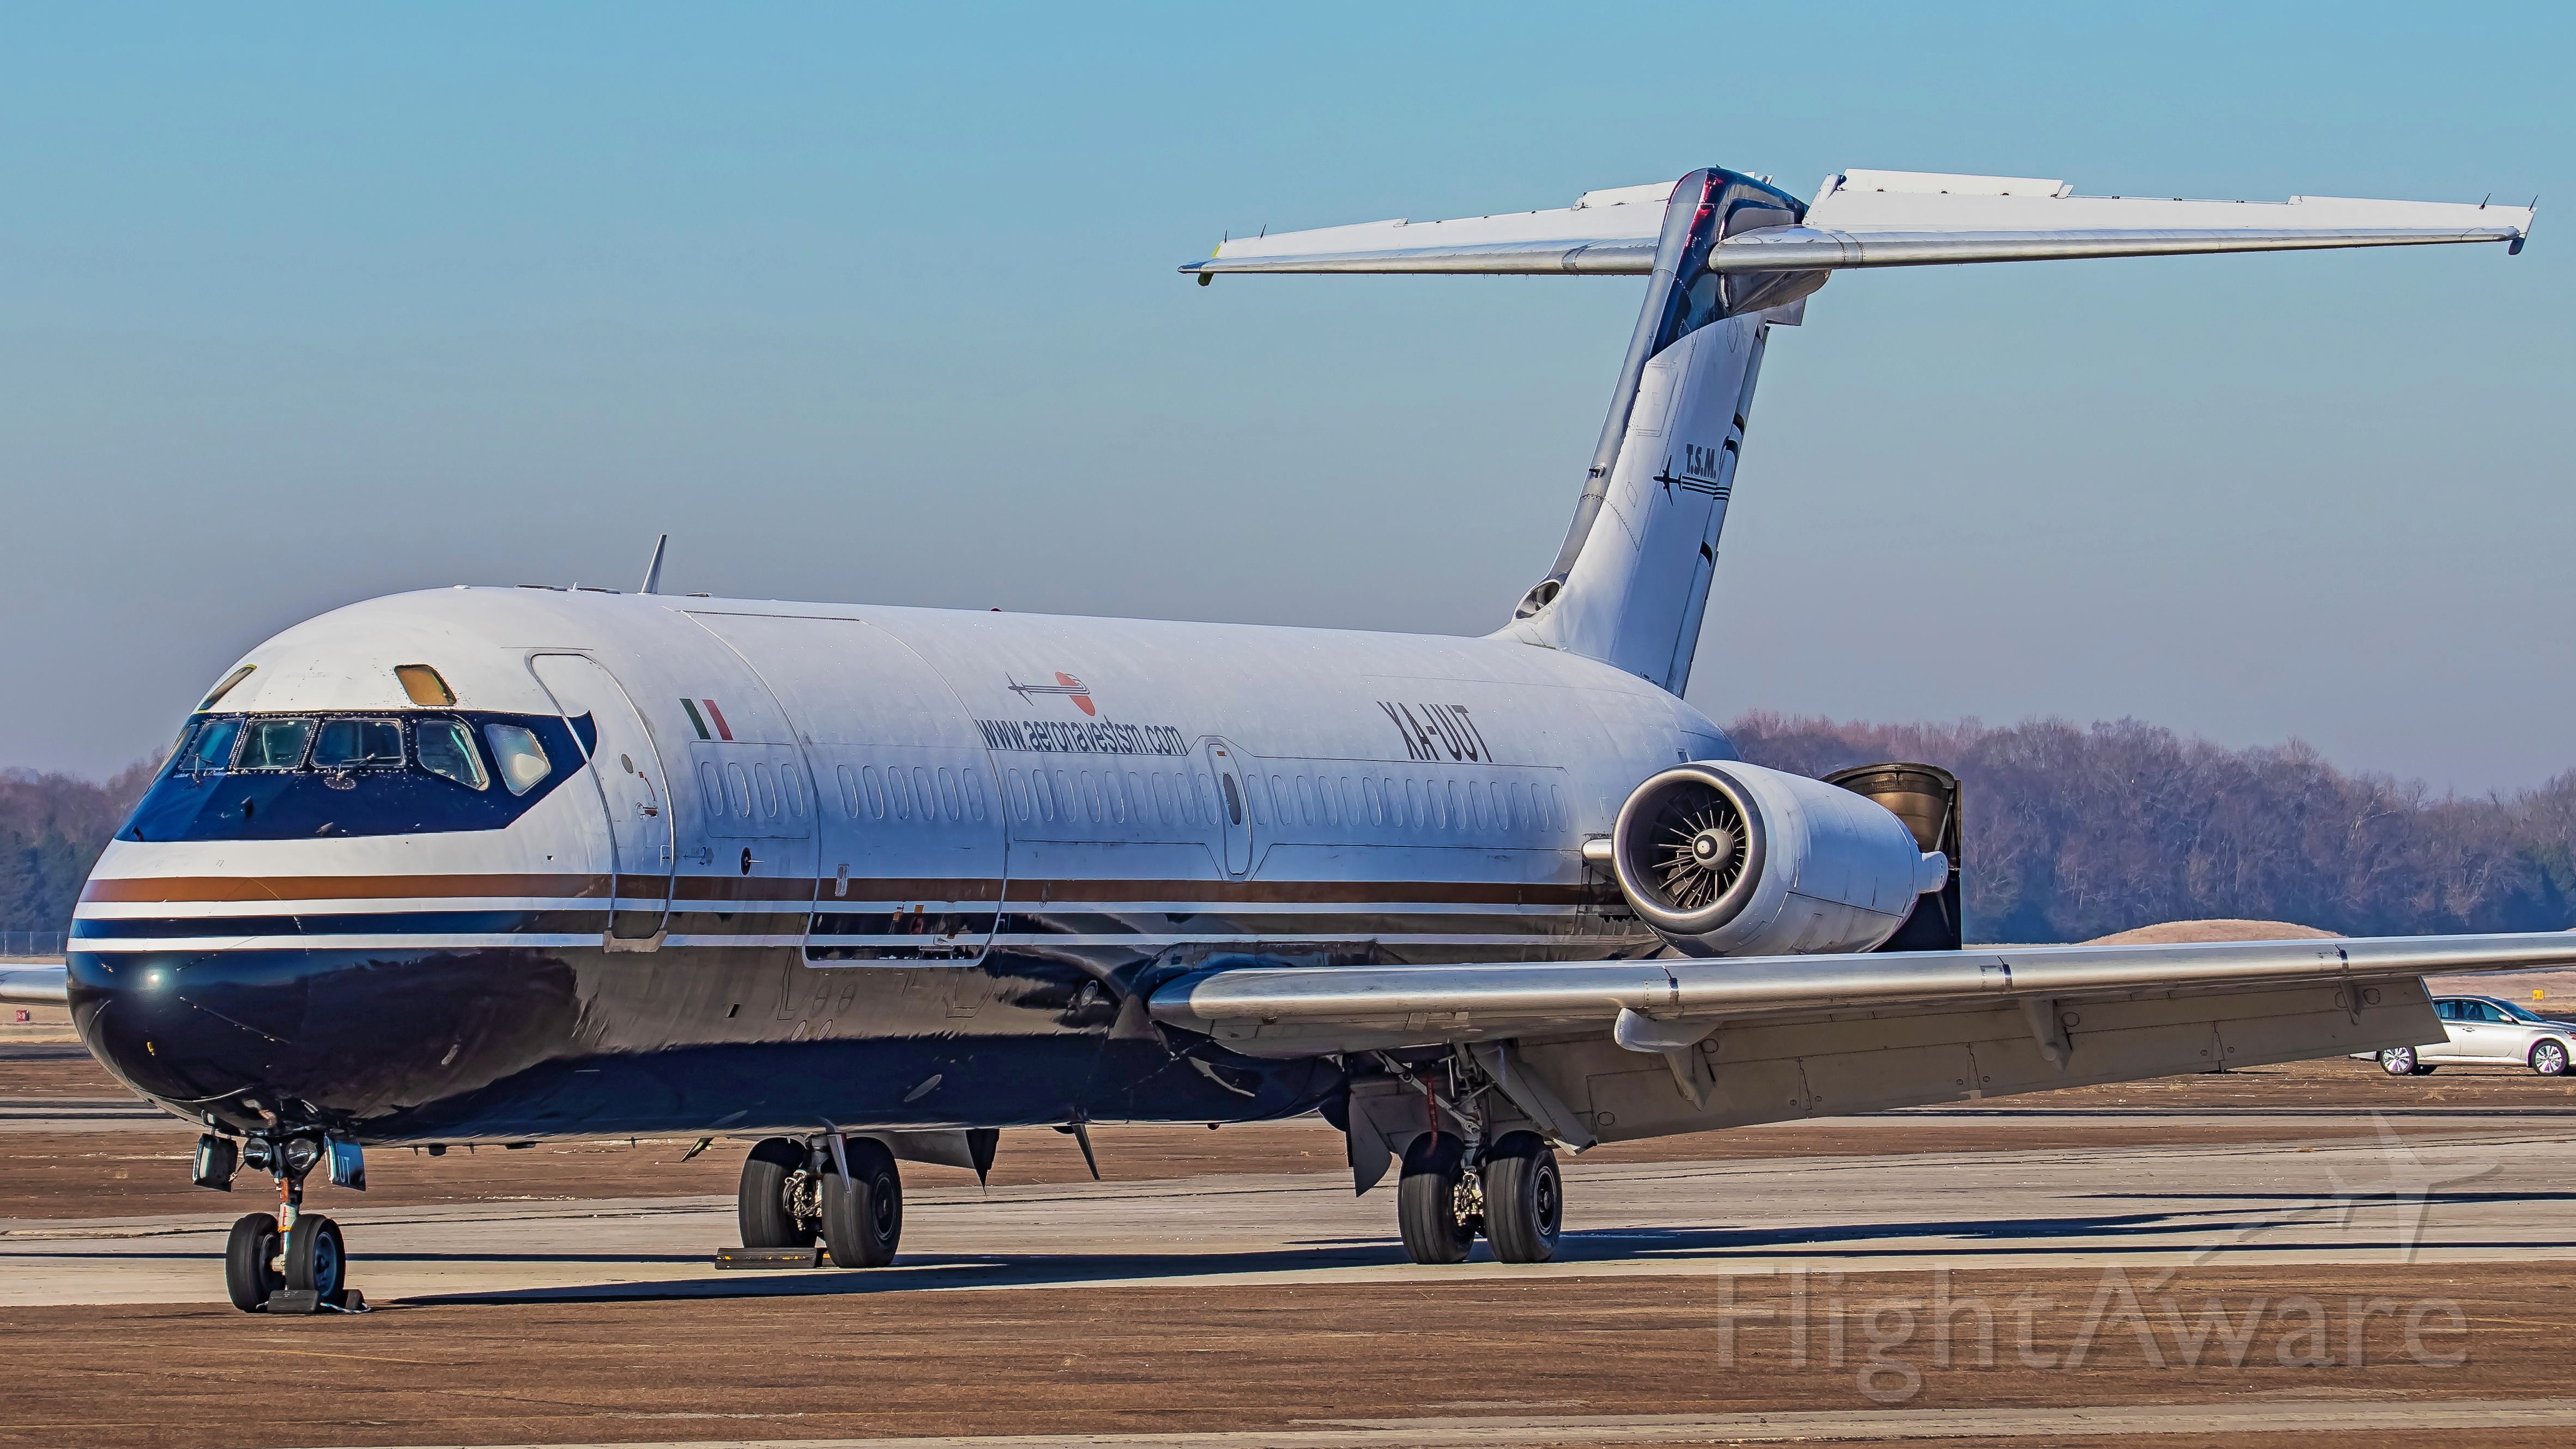 McDonnell Douglas DC-9-30 (XA-UUT) - December 11, 2018, Smyrna, TN -- This frost-covered DC-9-32F is parked at the east cargo ramp.